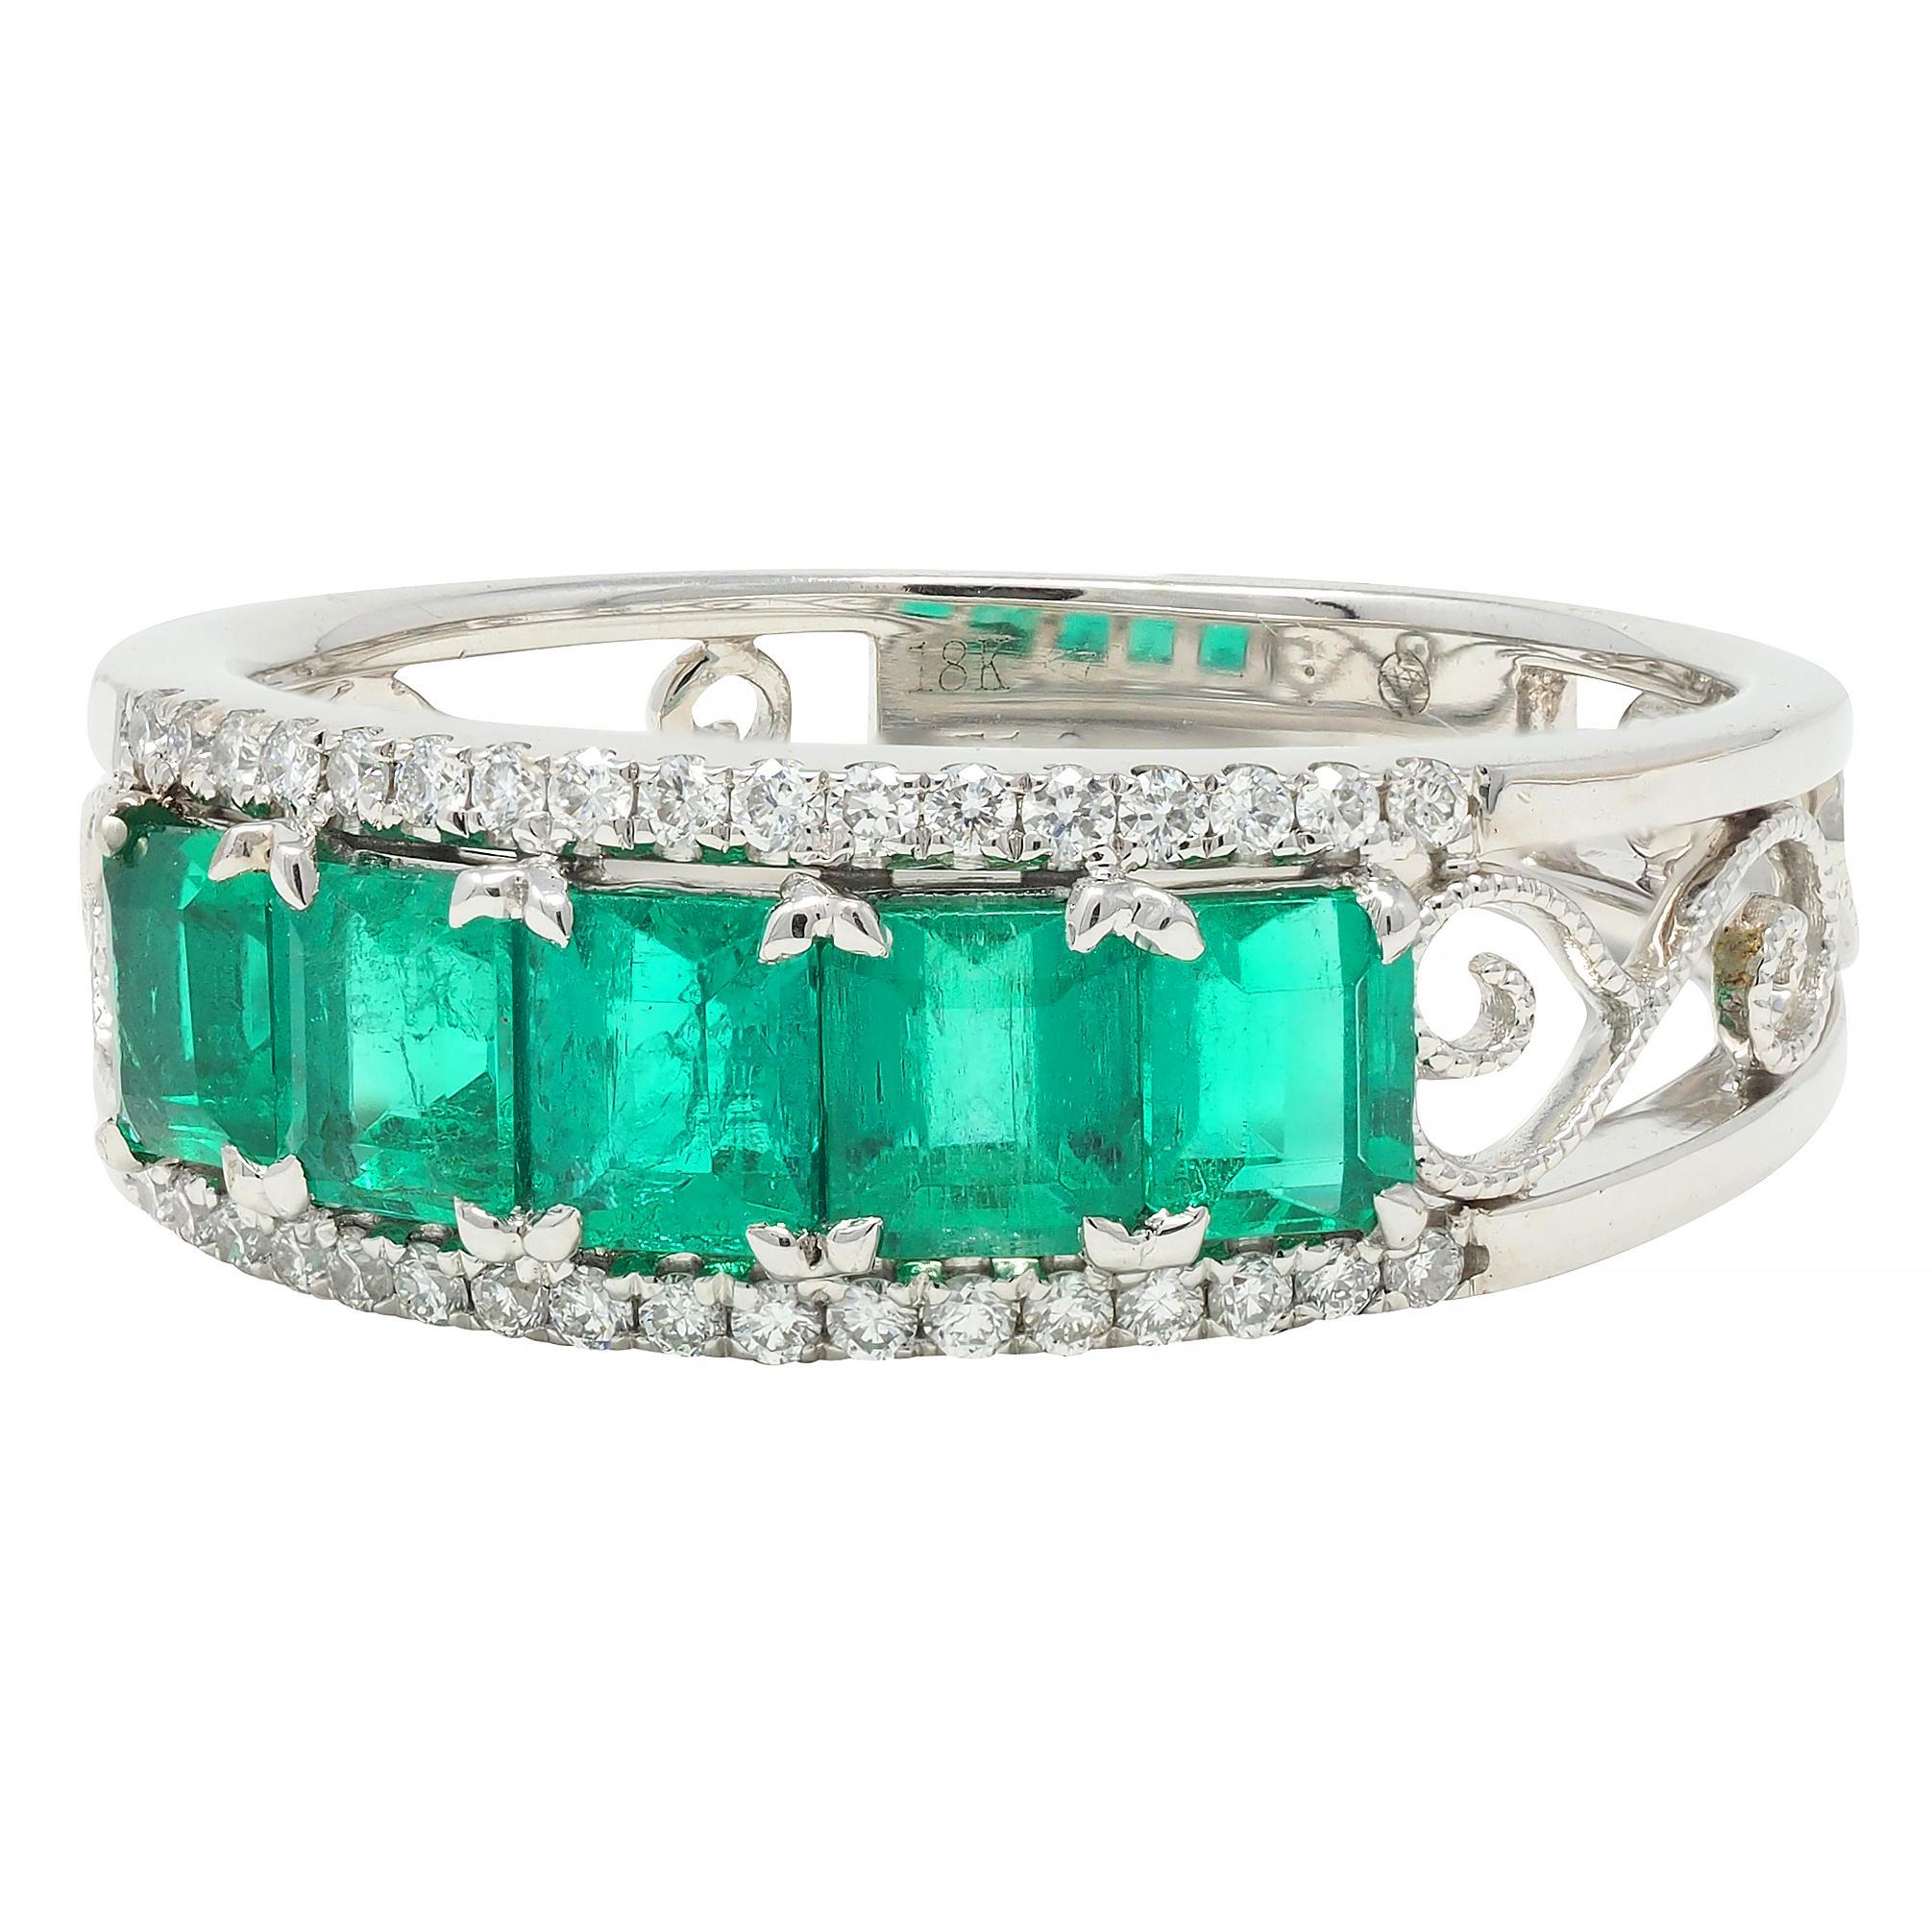 Featuring five emerald cut emeralds weighing 1.30 carat total 
Transparent medium green in color and prong set to front
Flanked north to south by rows of round brilliant cut diamonds
Weighing approximately 0.17 carat total - eye clean and